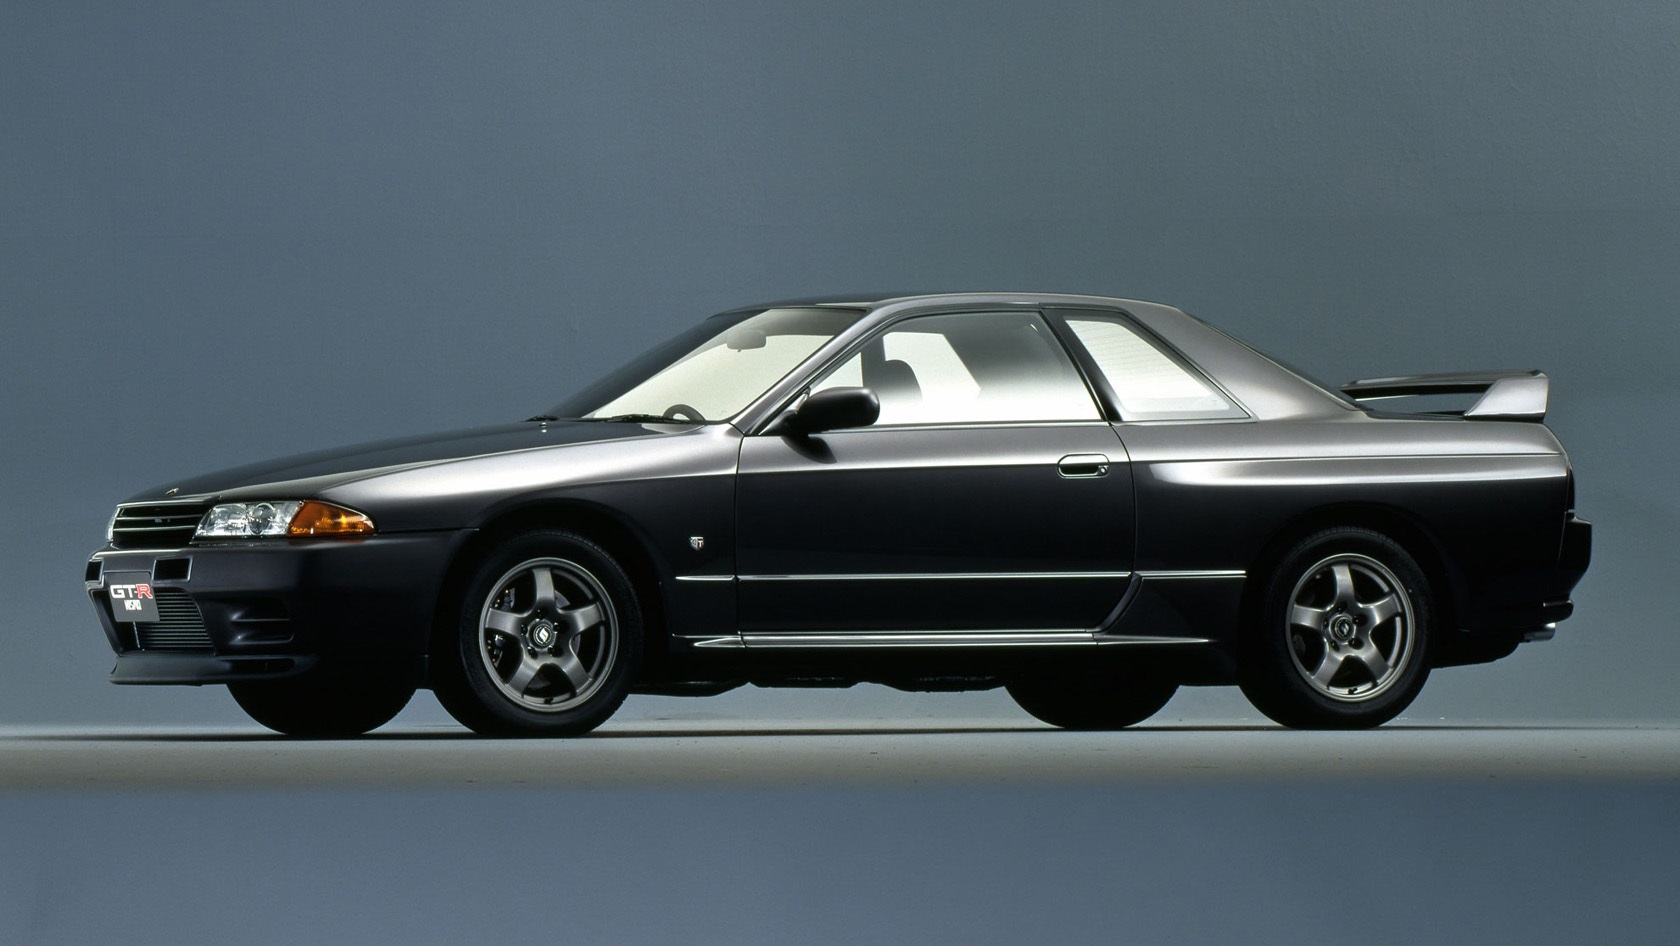 Nissan Skyline Viii R32 1989 1994 Coupe Outstanding Cars